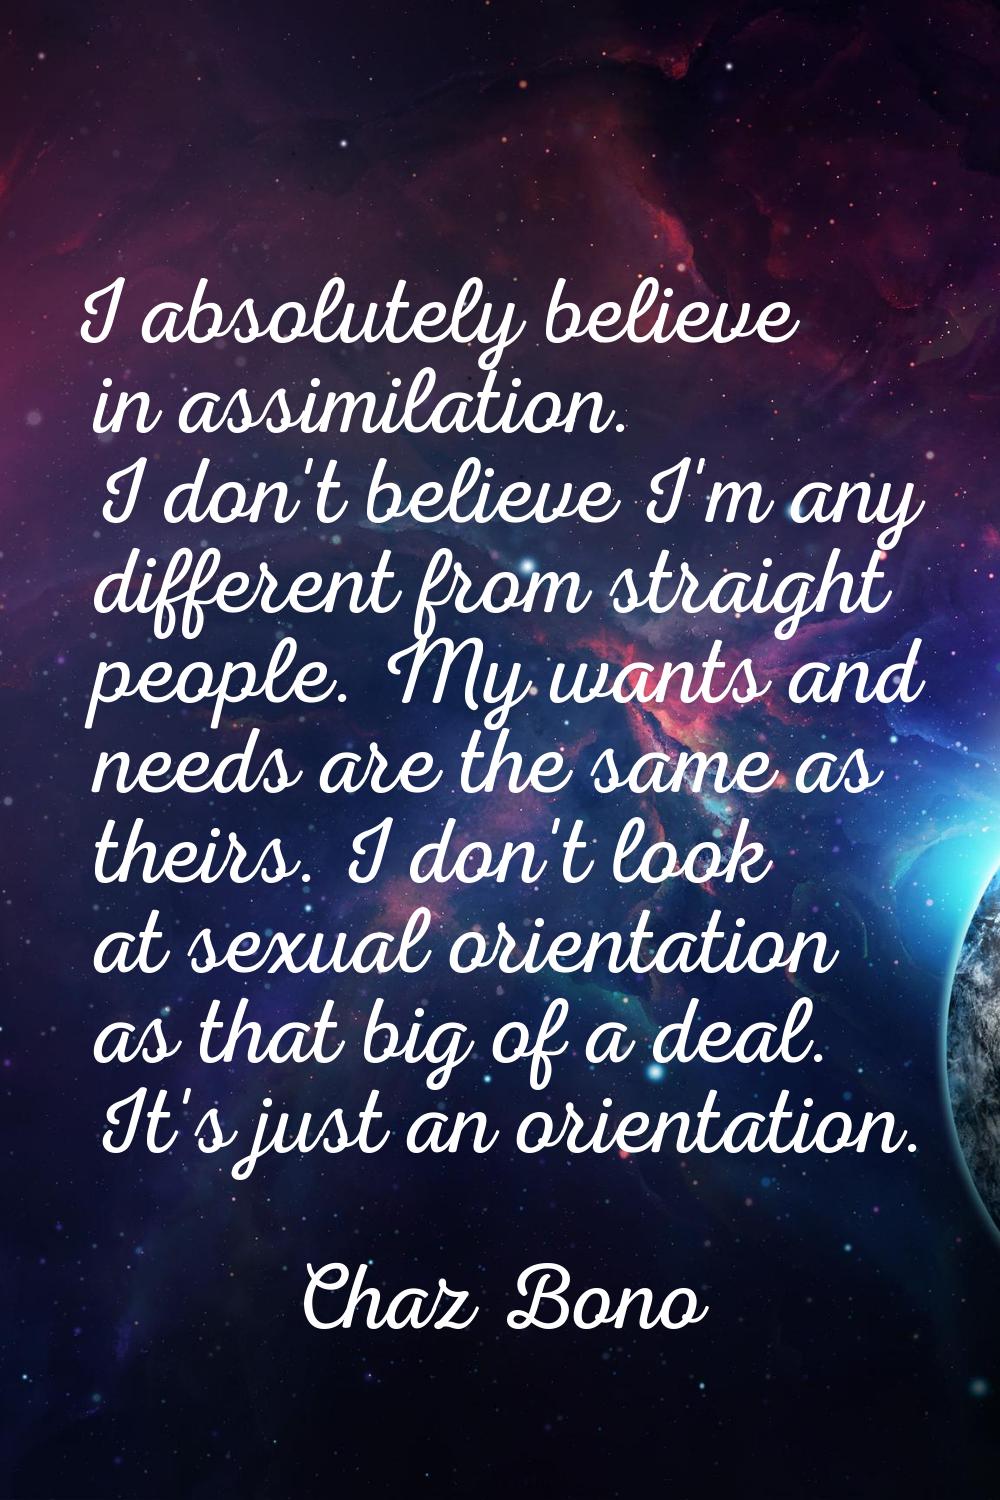 I absolutely believe in assimilation. I don't believe I'm any different from straight people. My wa